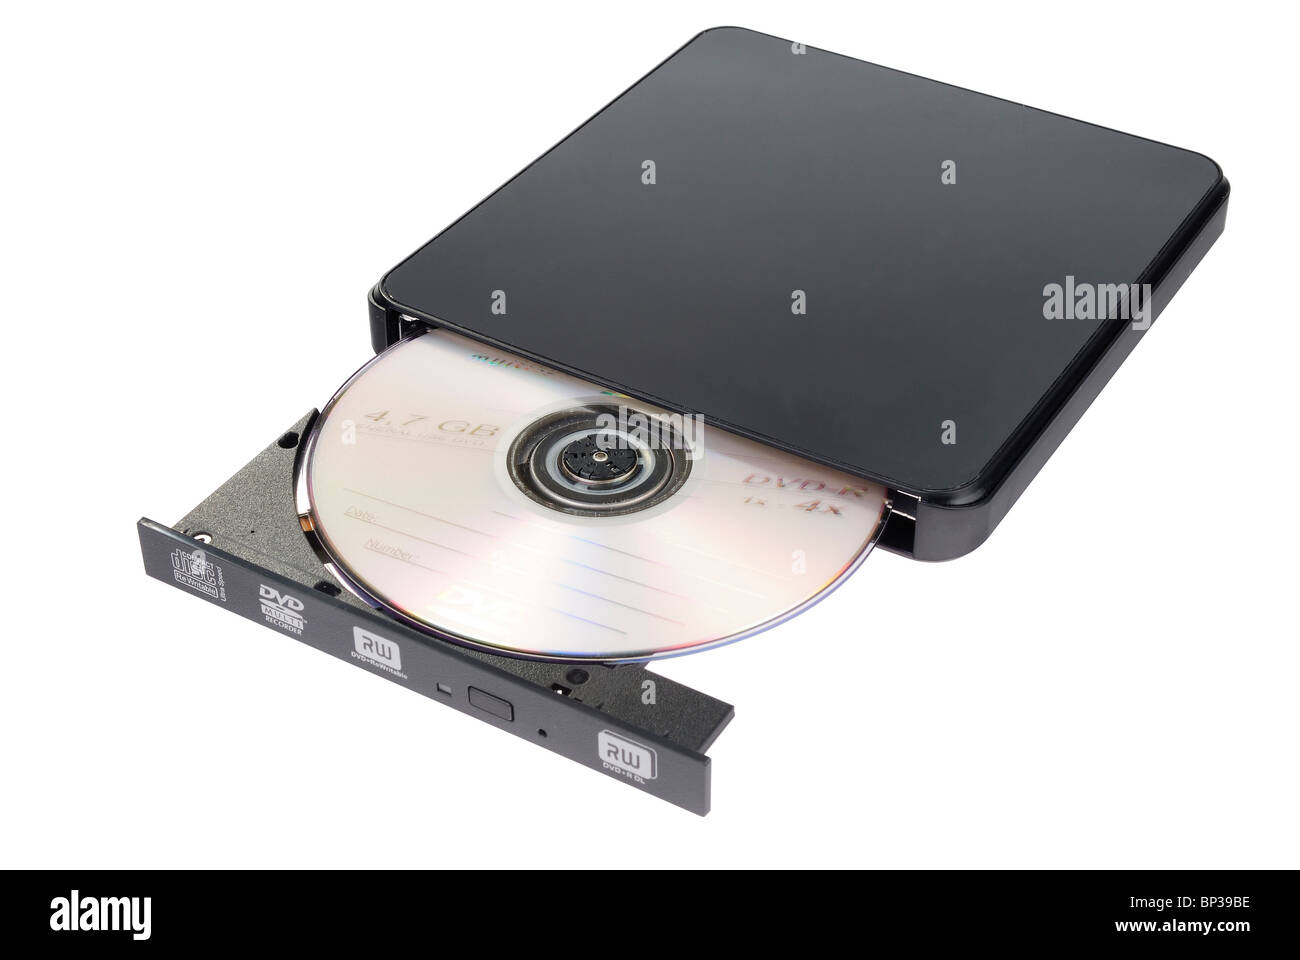 Higgins skepsis Learner The DVD and CD-ROM drive Stock Photo - Alamy